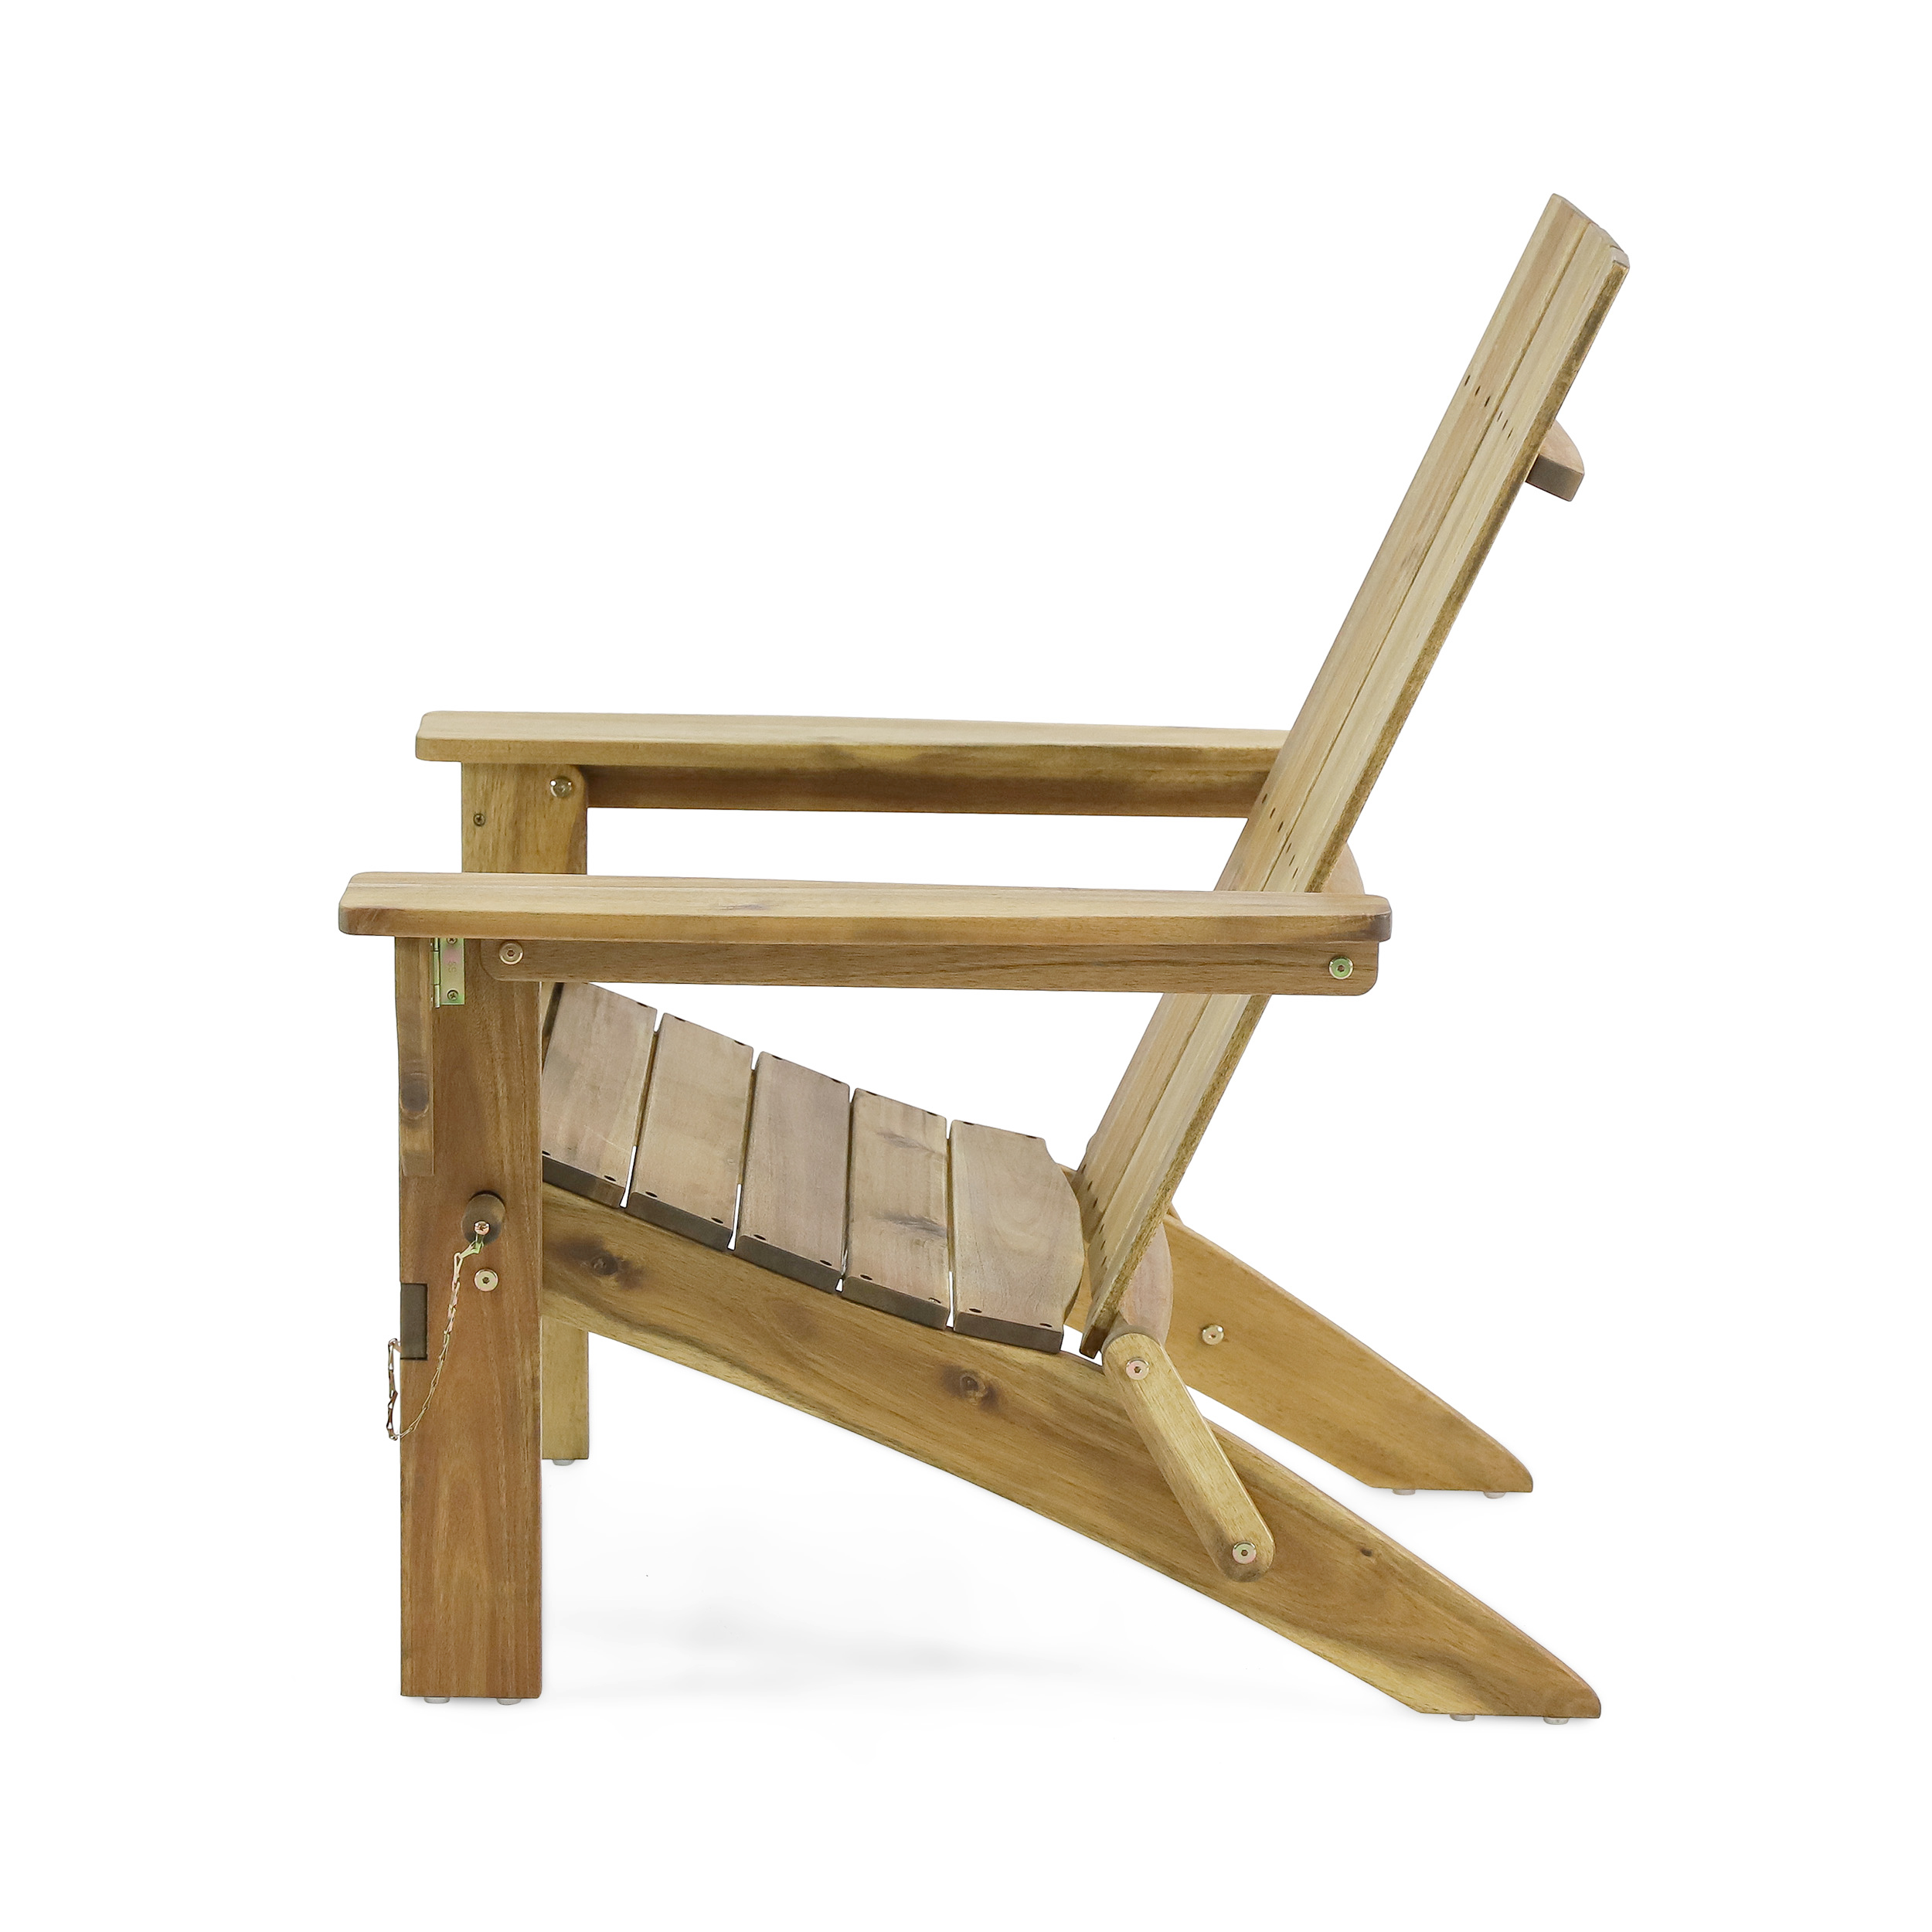 KUIKUI Outdoor Classic Natural Color Solid Wood Adirondack Chair Garden Lounge Chair - image 4 of 5